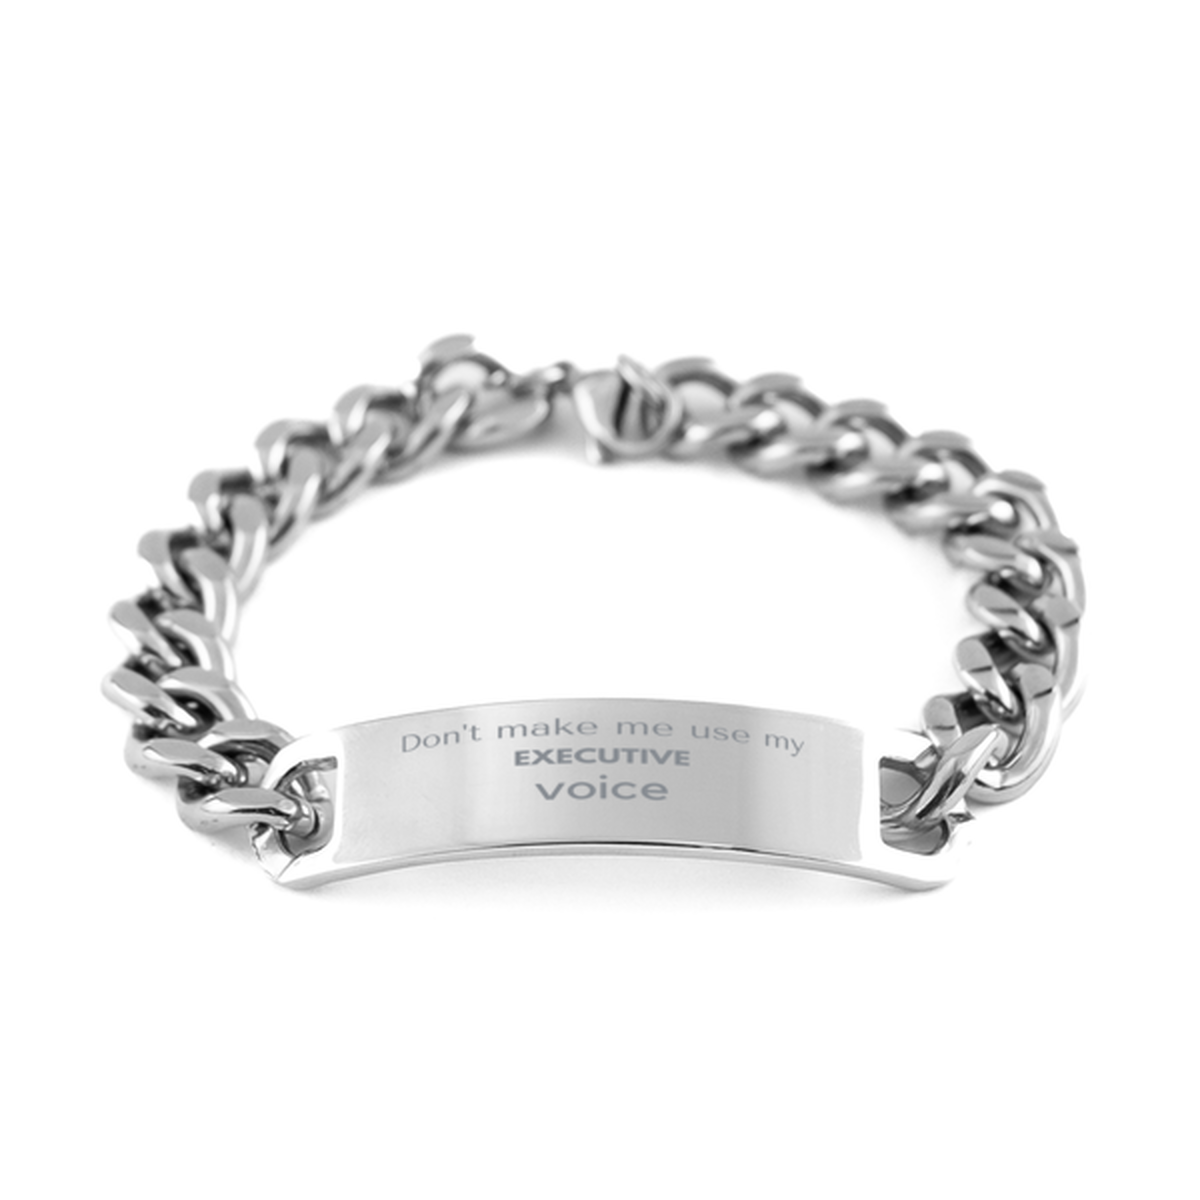 Don't make me use my Executive voice, Sarcasm Executive Gifts, Christmas Executive Cuban Chain Stainless Steel Bracelet Birthday Unique Gifts For Executive Coworkers, Men, Women, Colleague, Friends